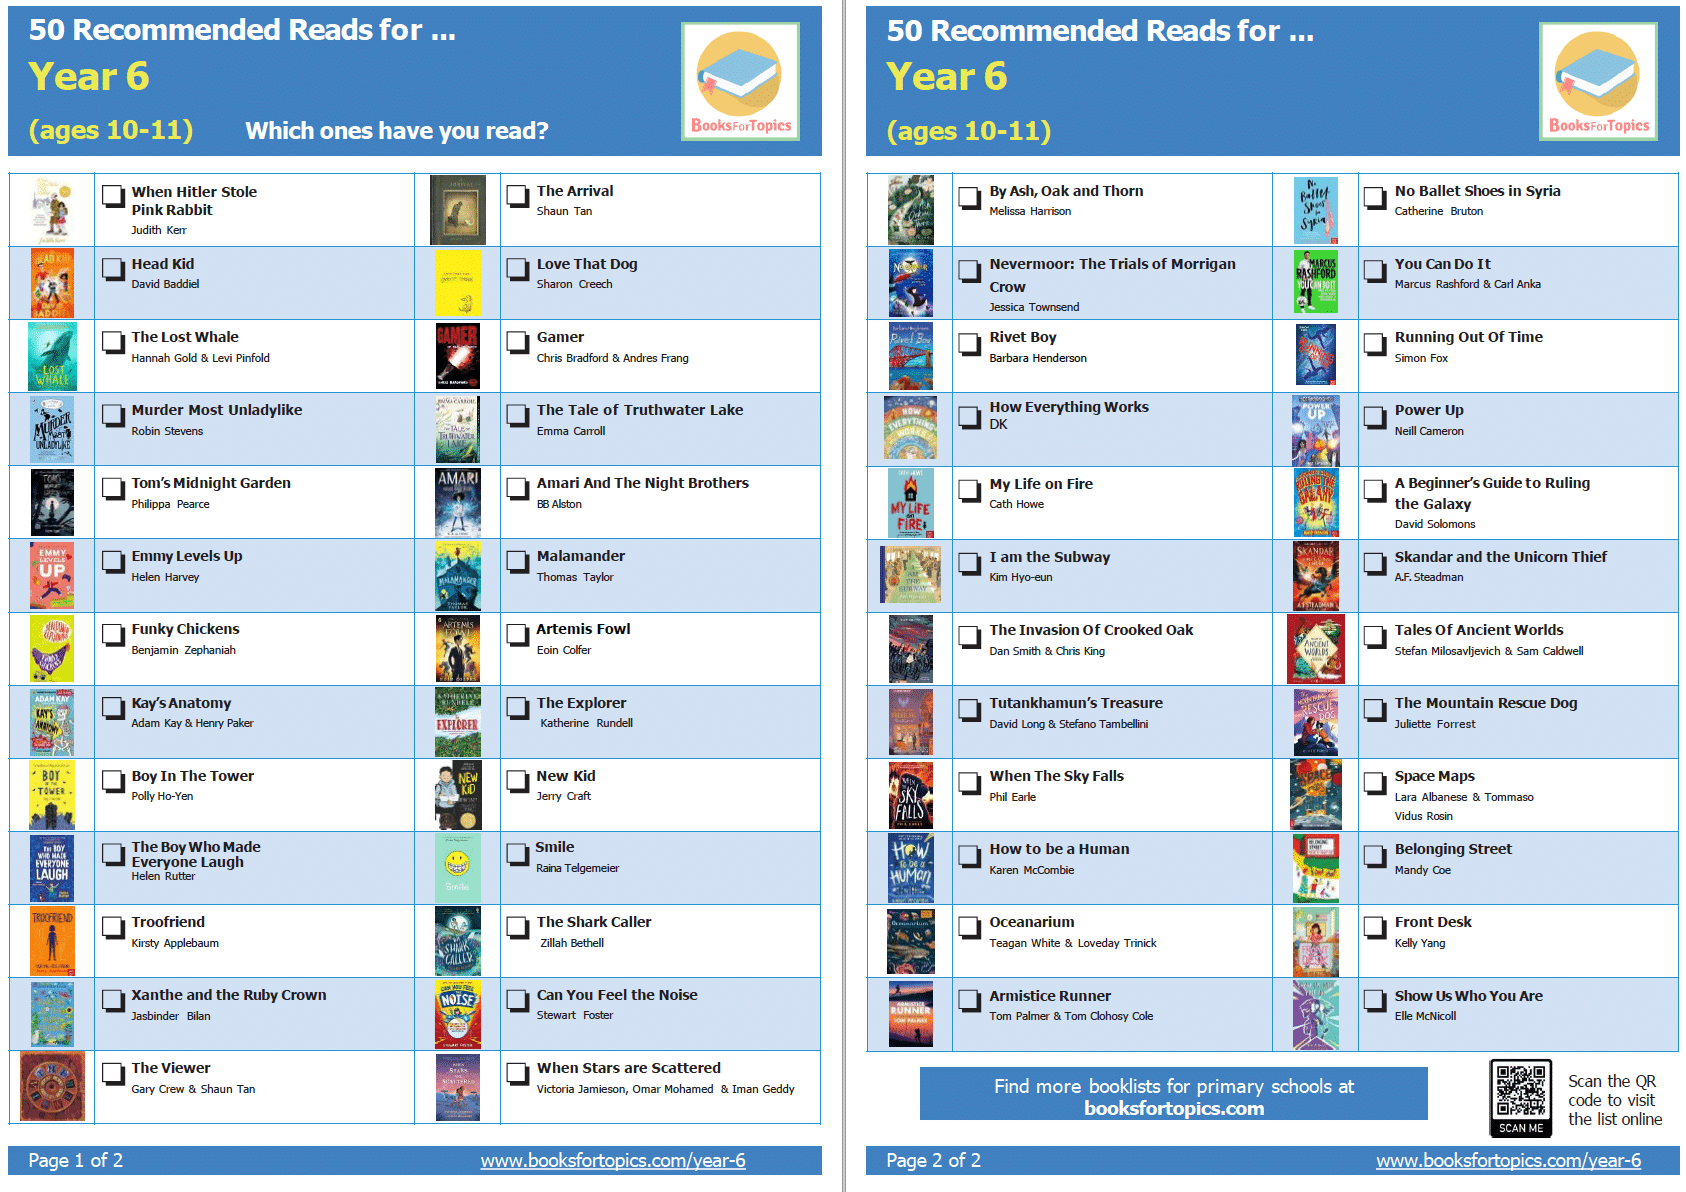 y6 recommended reading list checklist